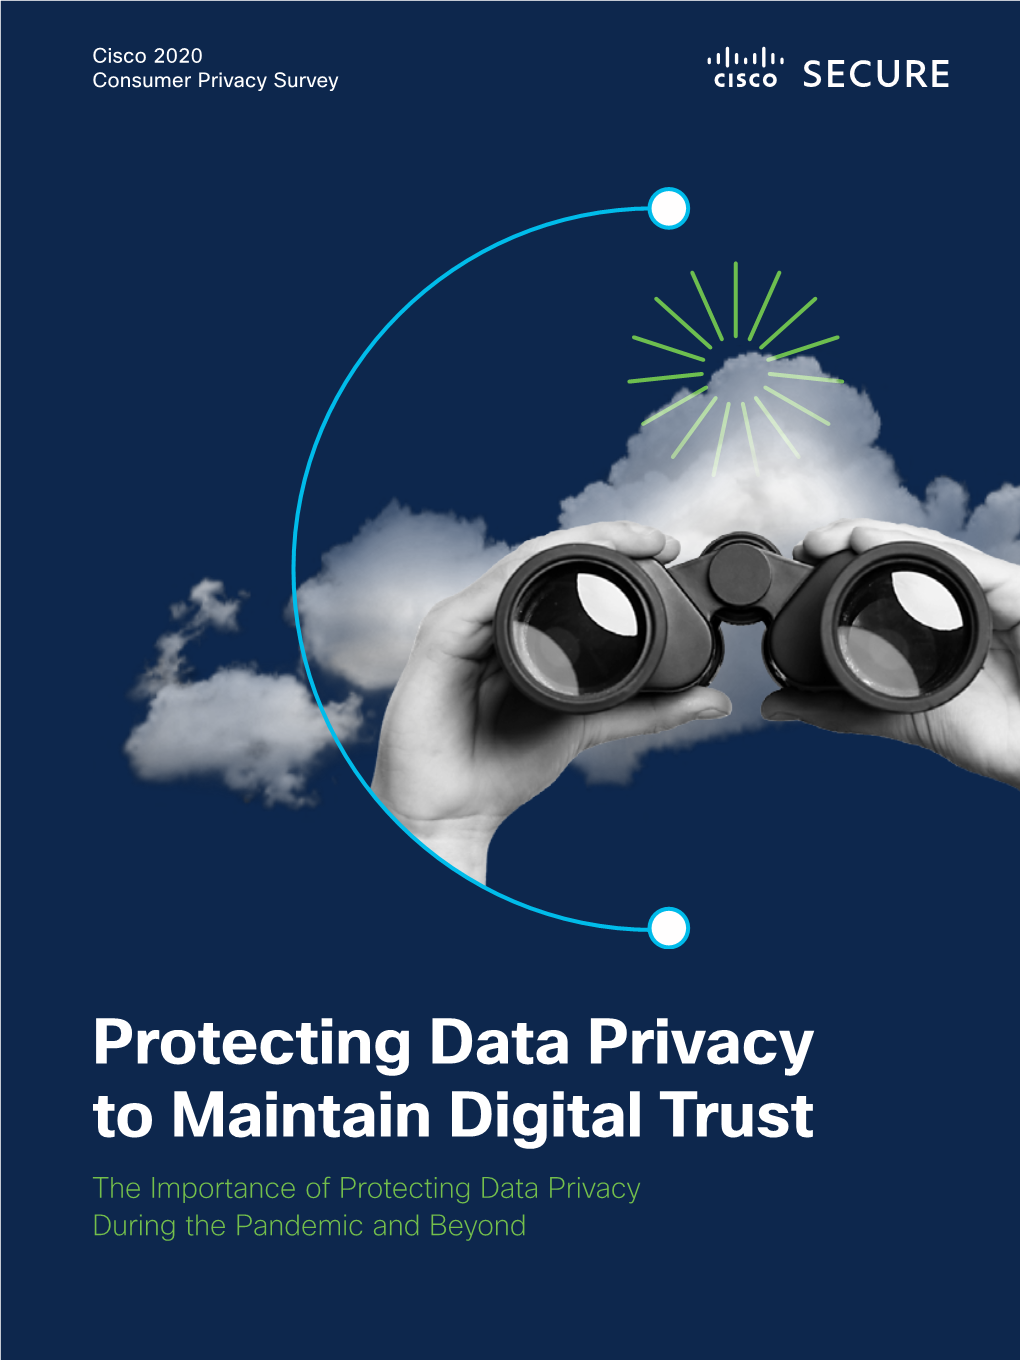 Protecting Data Privacy to Maintain Digital Trust the Importance of Protecting Data Privacy During the Pandemic and Beyond Contents